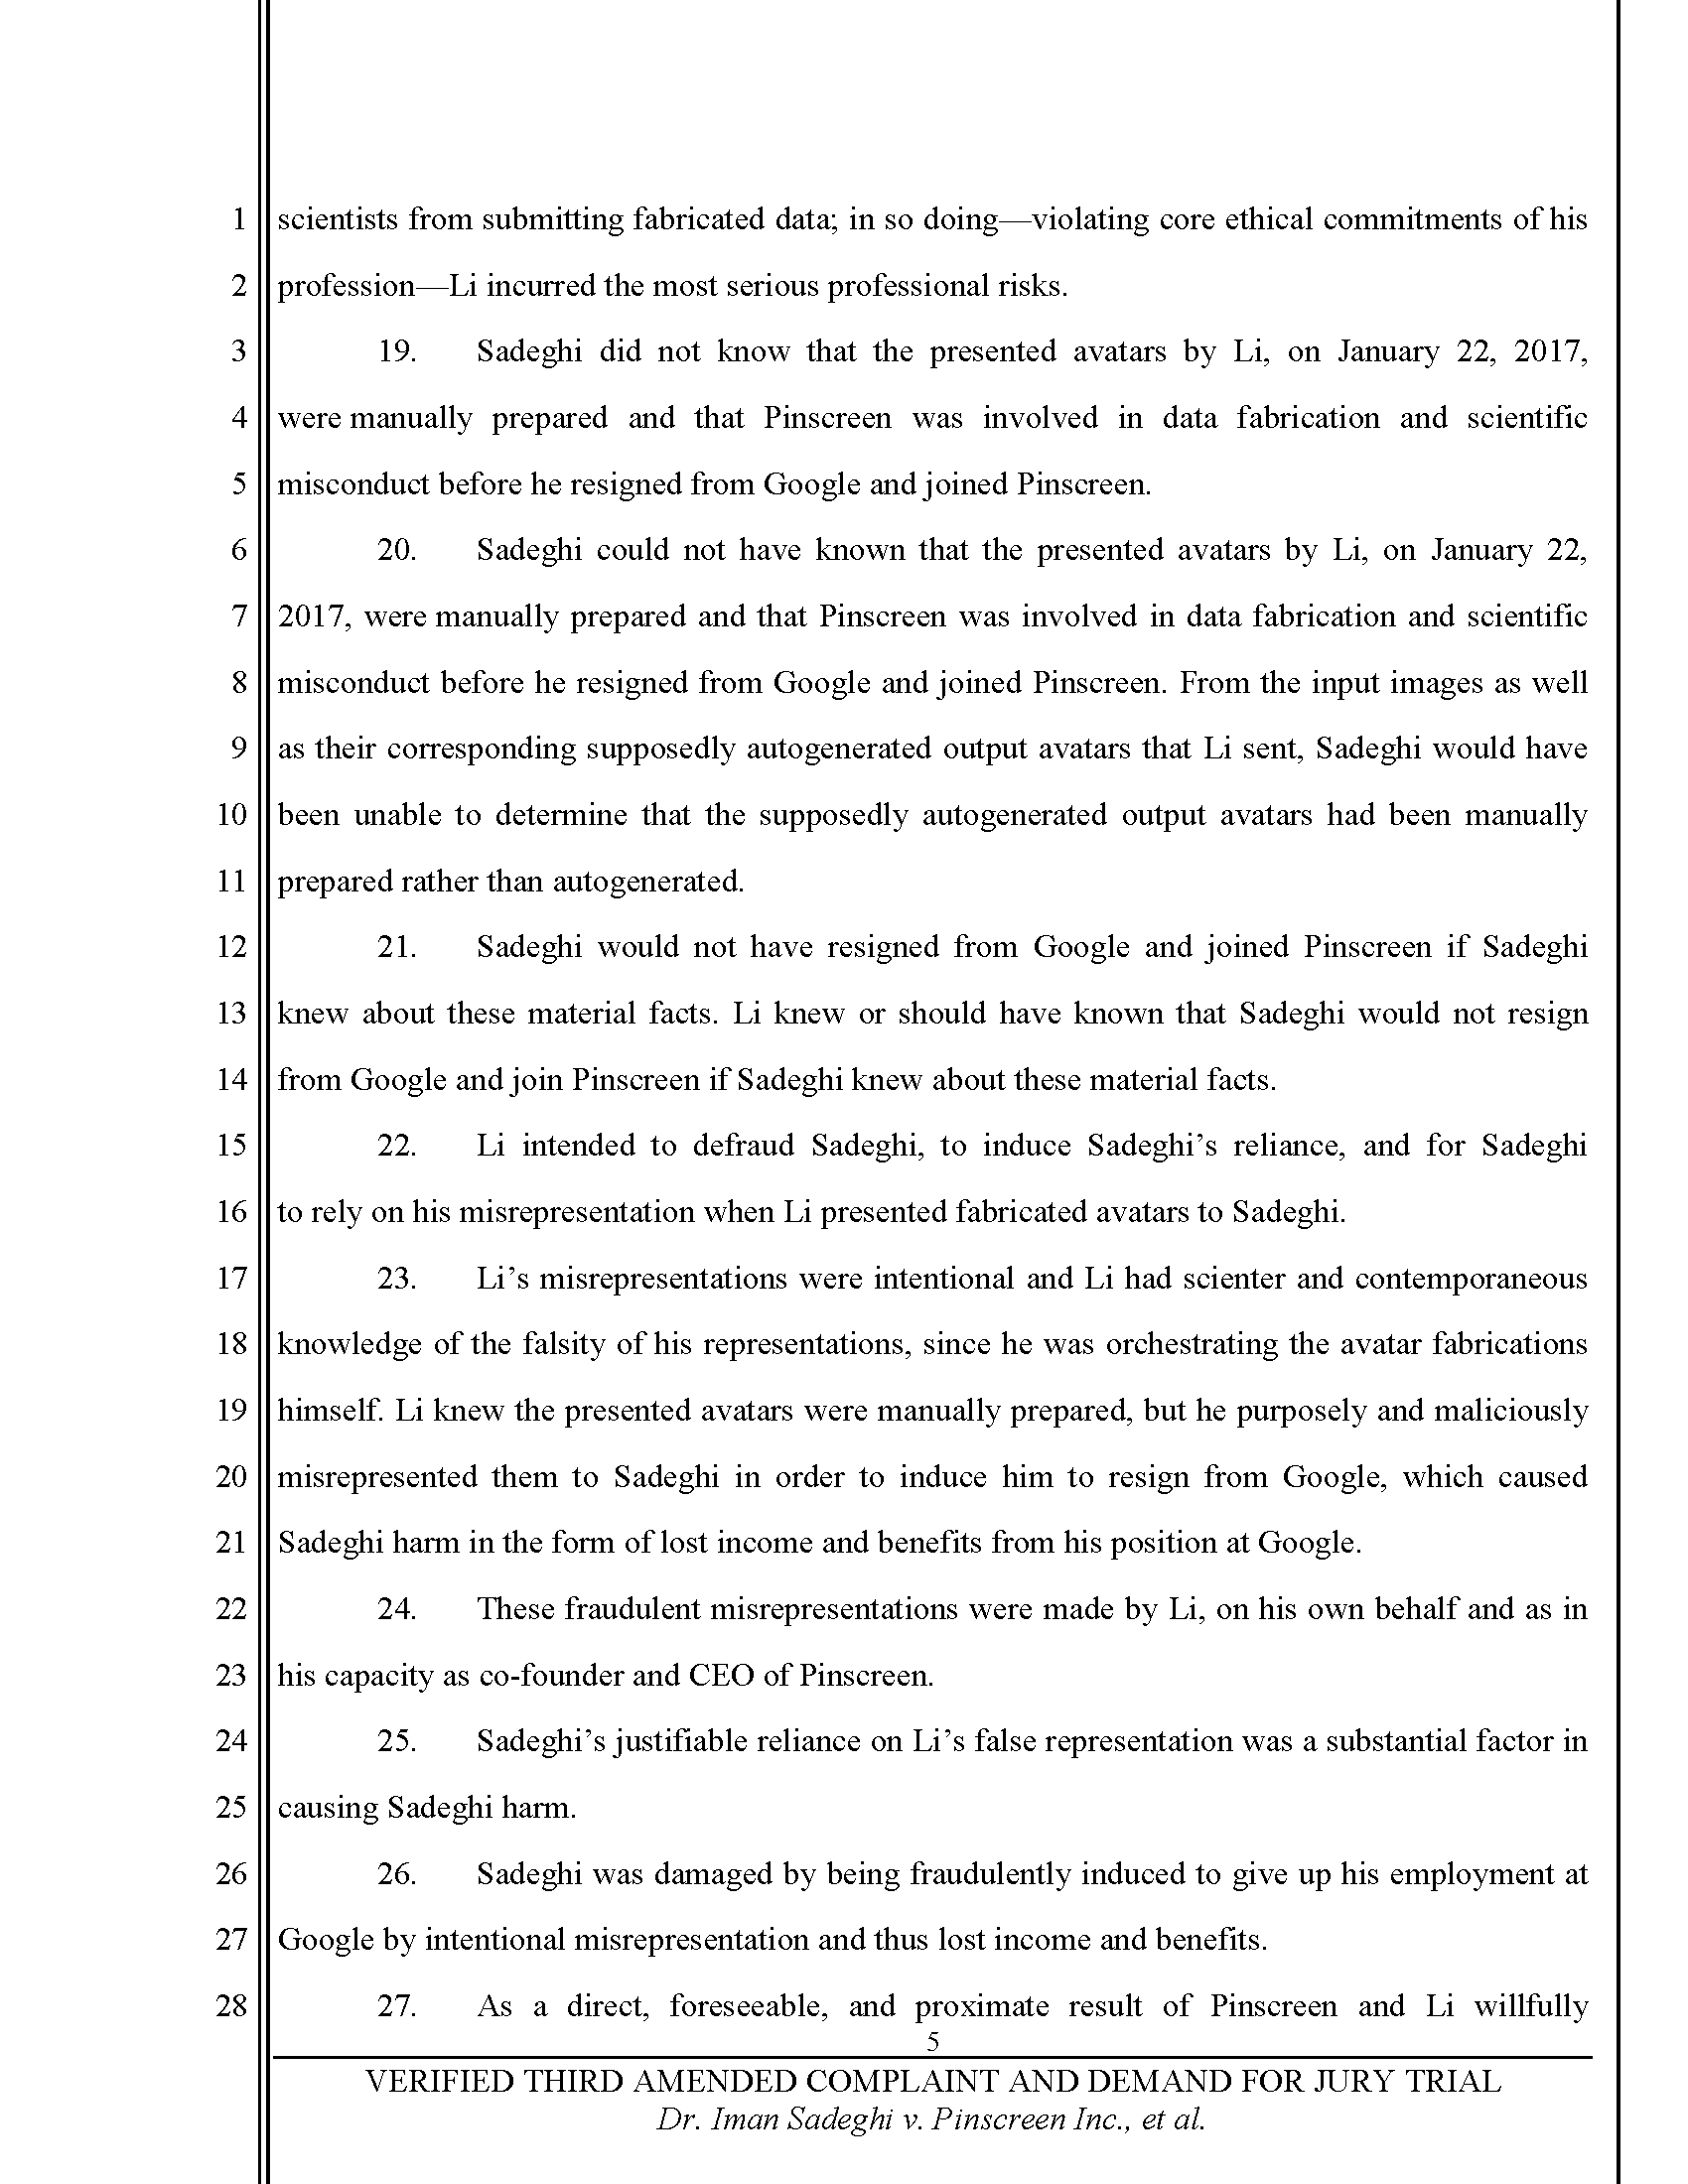 Third Amended Complaint (TAC) Page 6